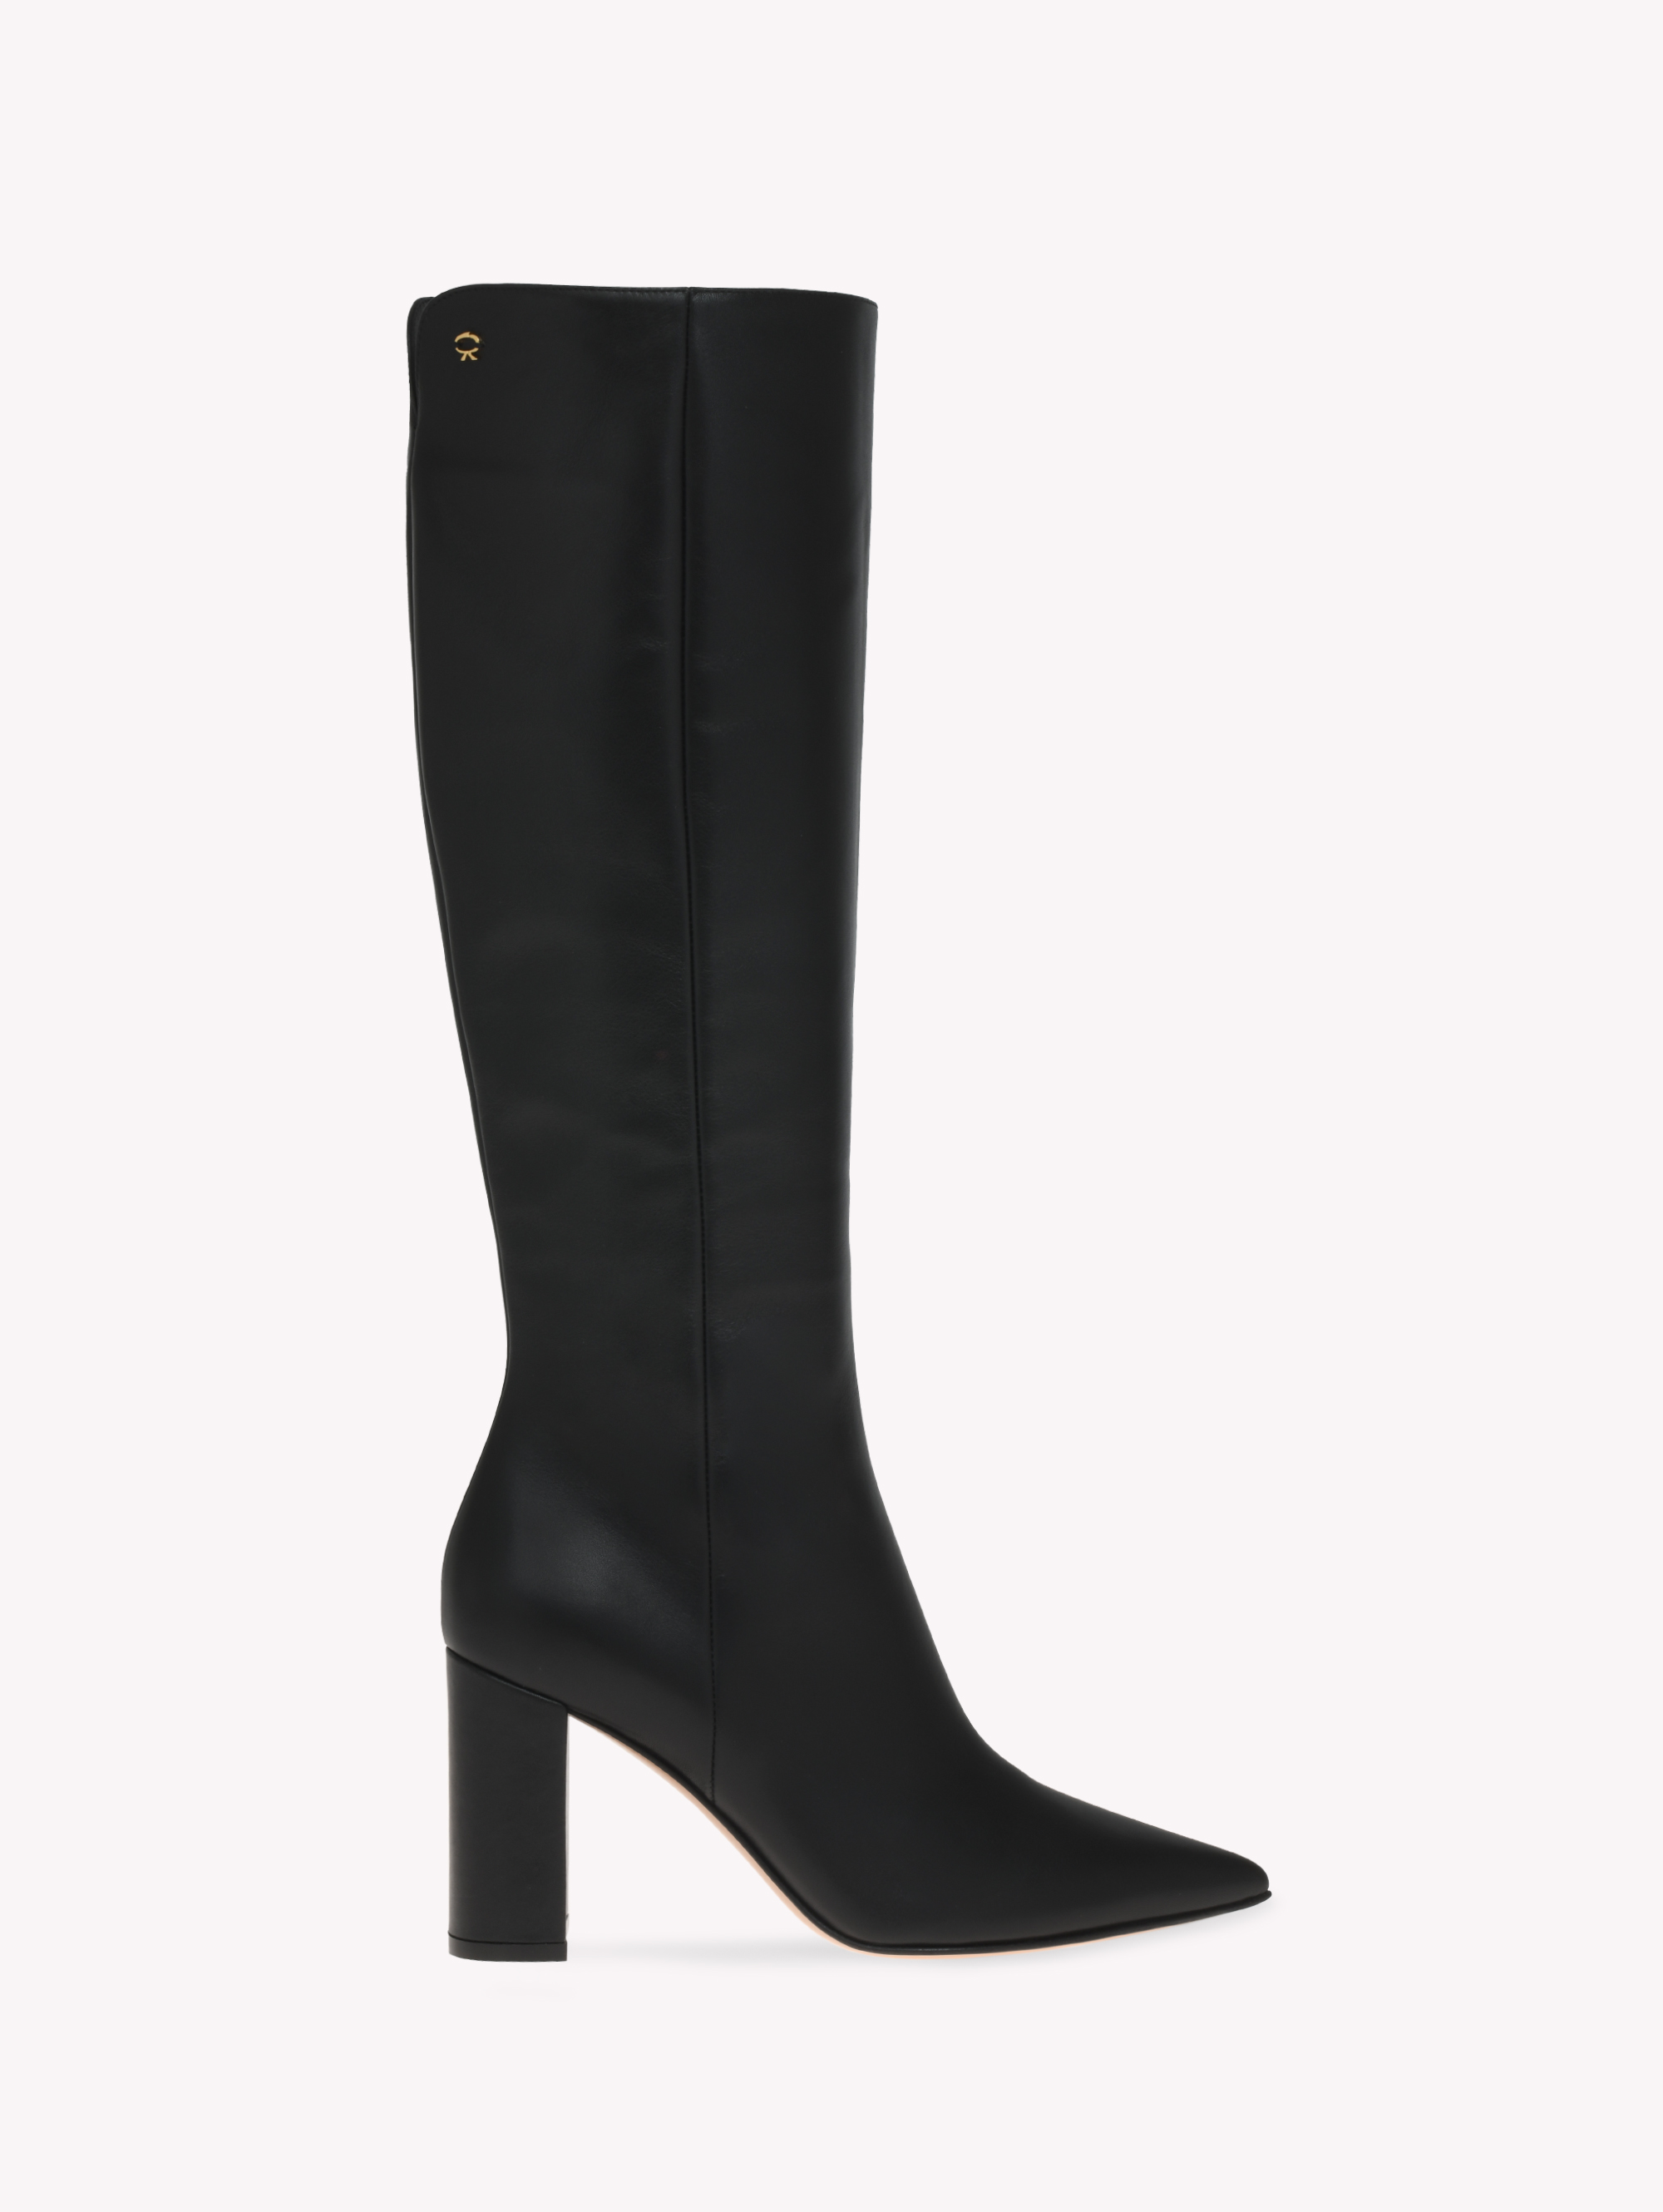 Boots for Women LYELL BOOT | Gianvito Rossi